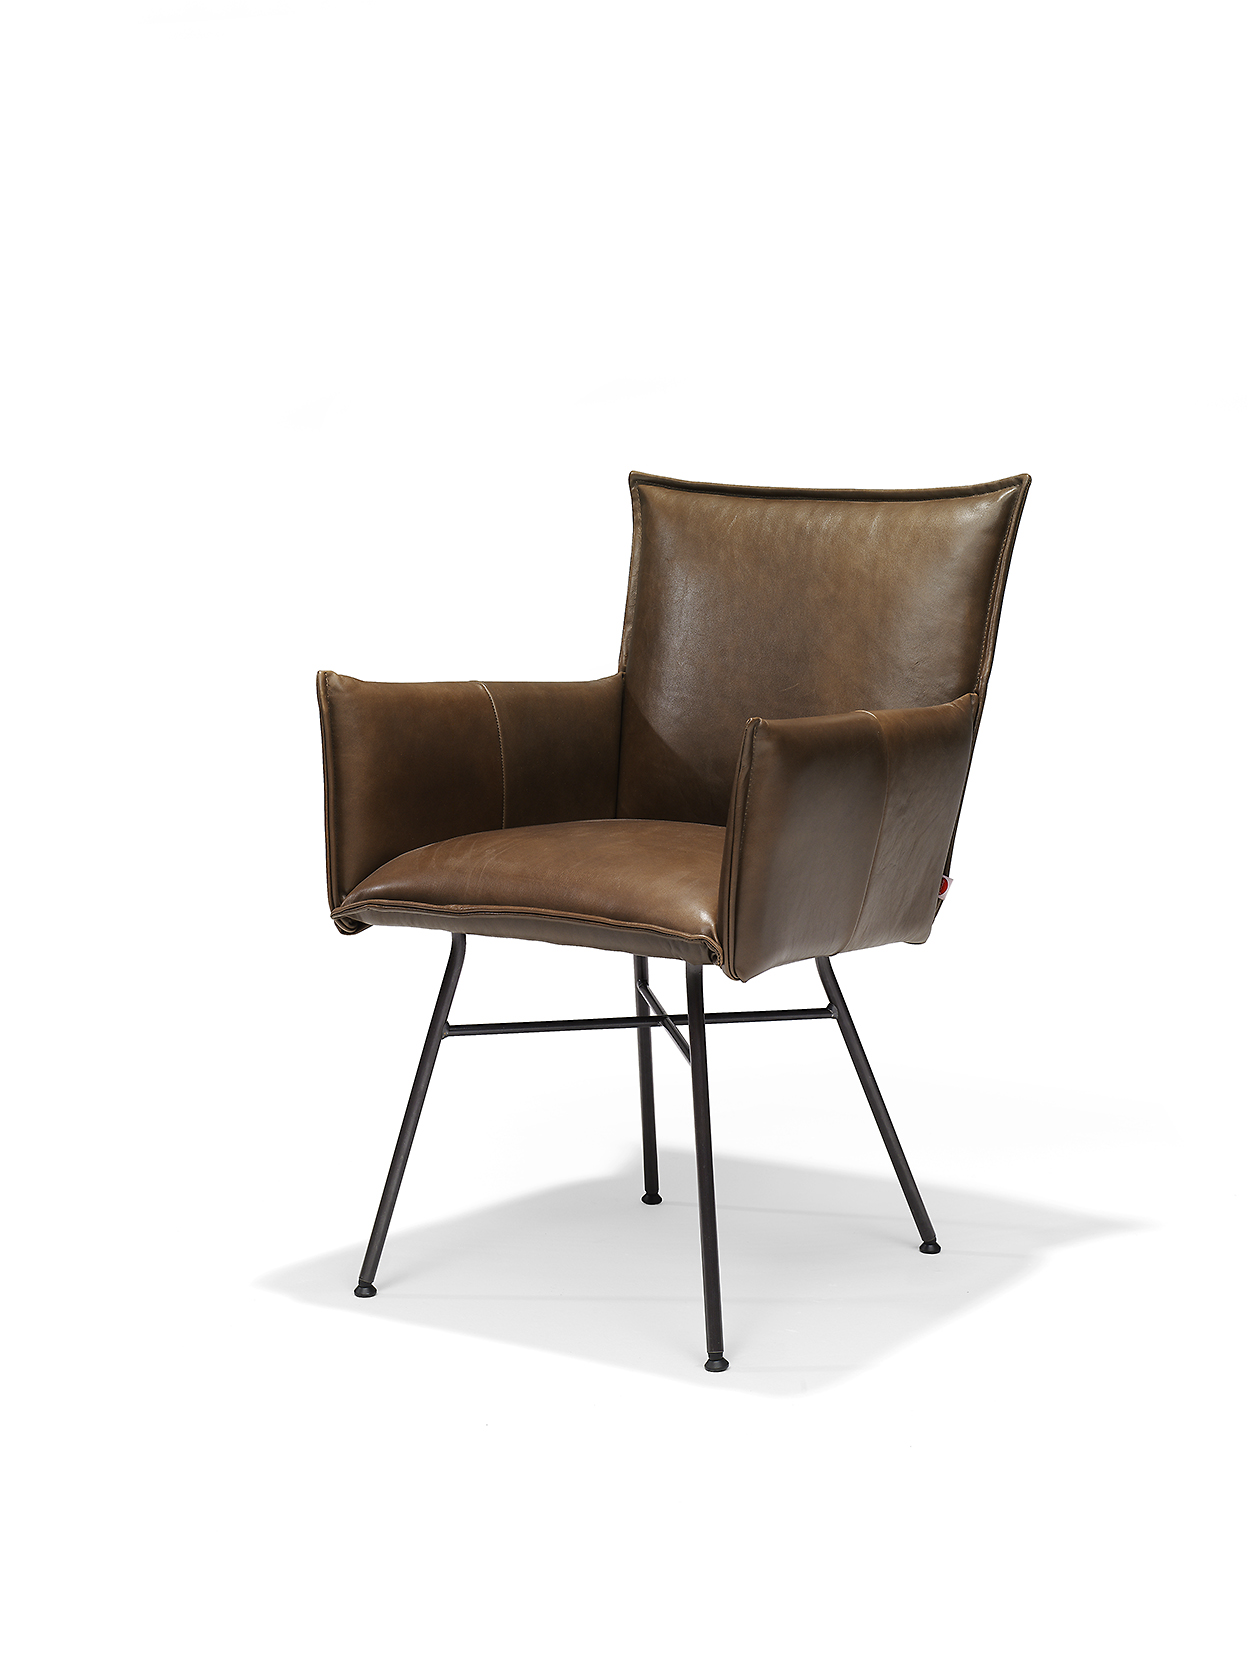 Sanne Chair With Arm Luxor Fango Pers LR